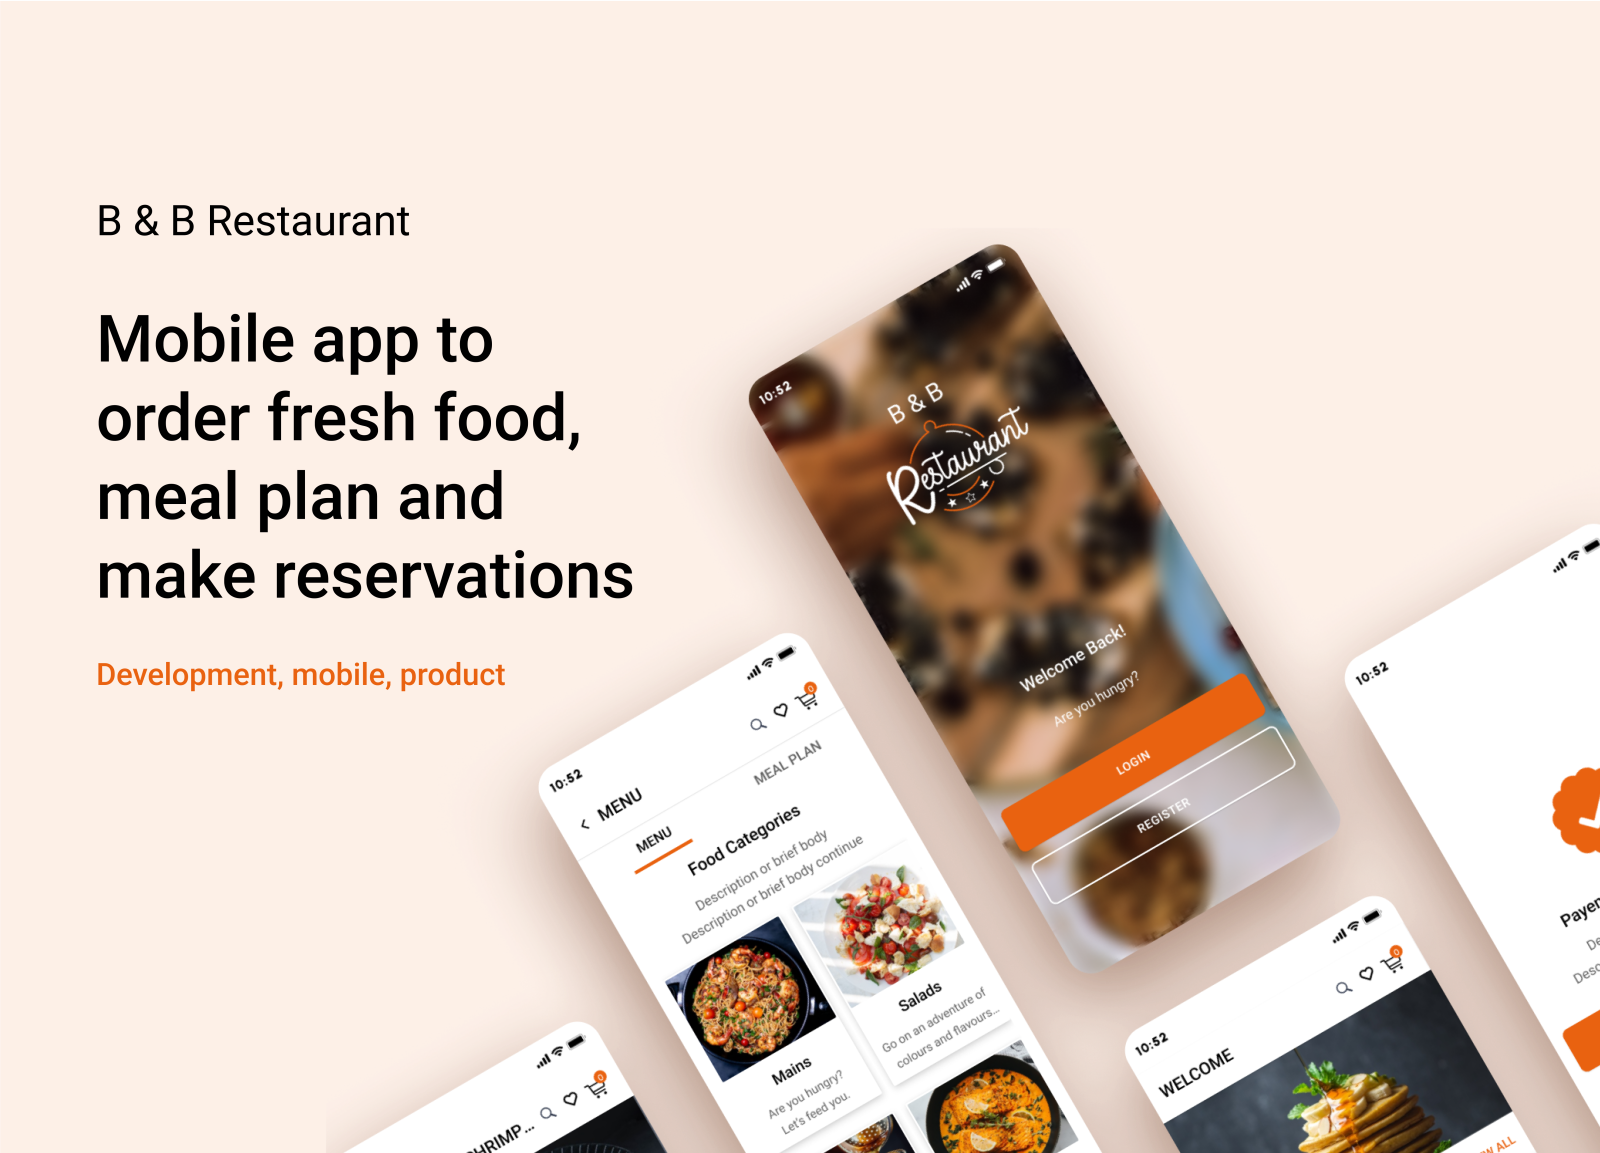 B And B Restaurant Mobile App Meal Orderplan And Reservations By Syster Esmeralda Obene On Dribbble 4156